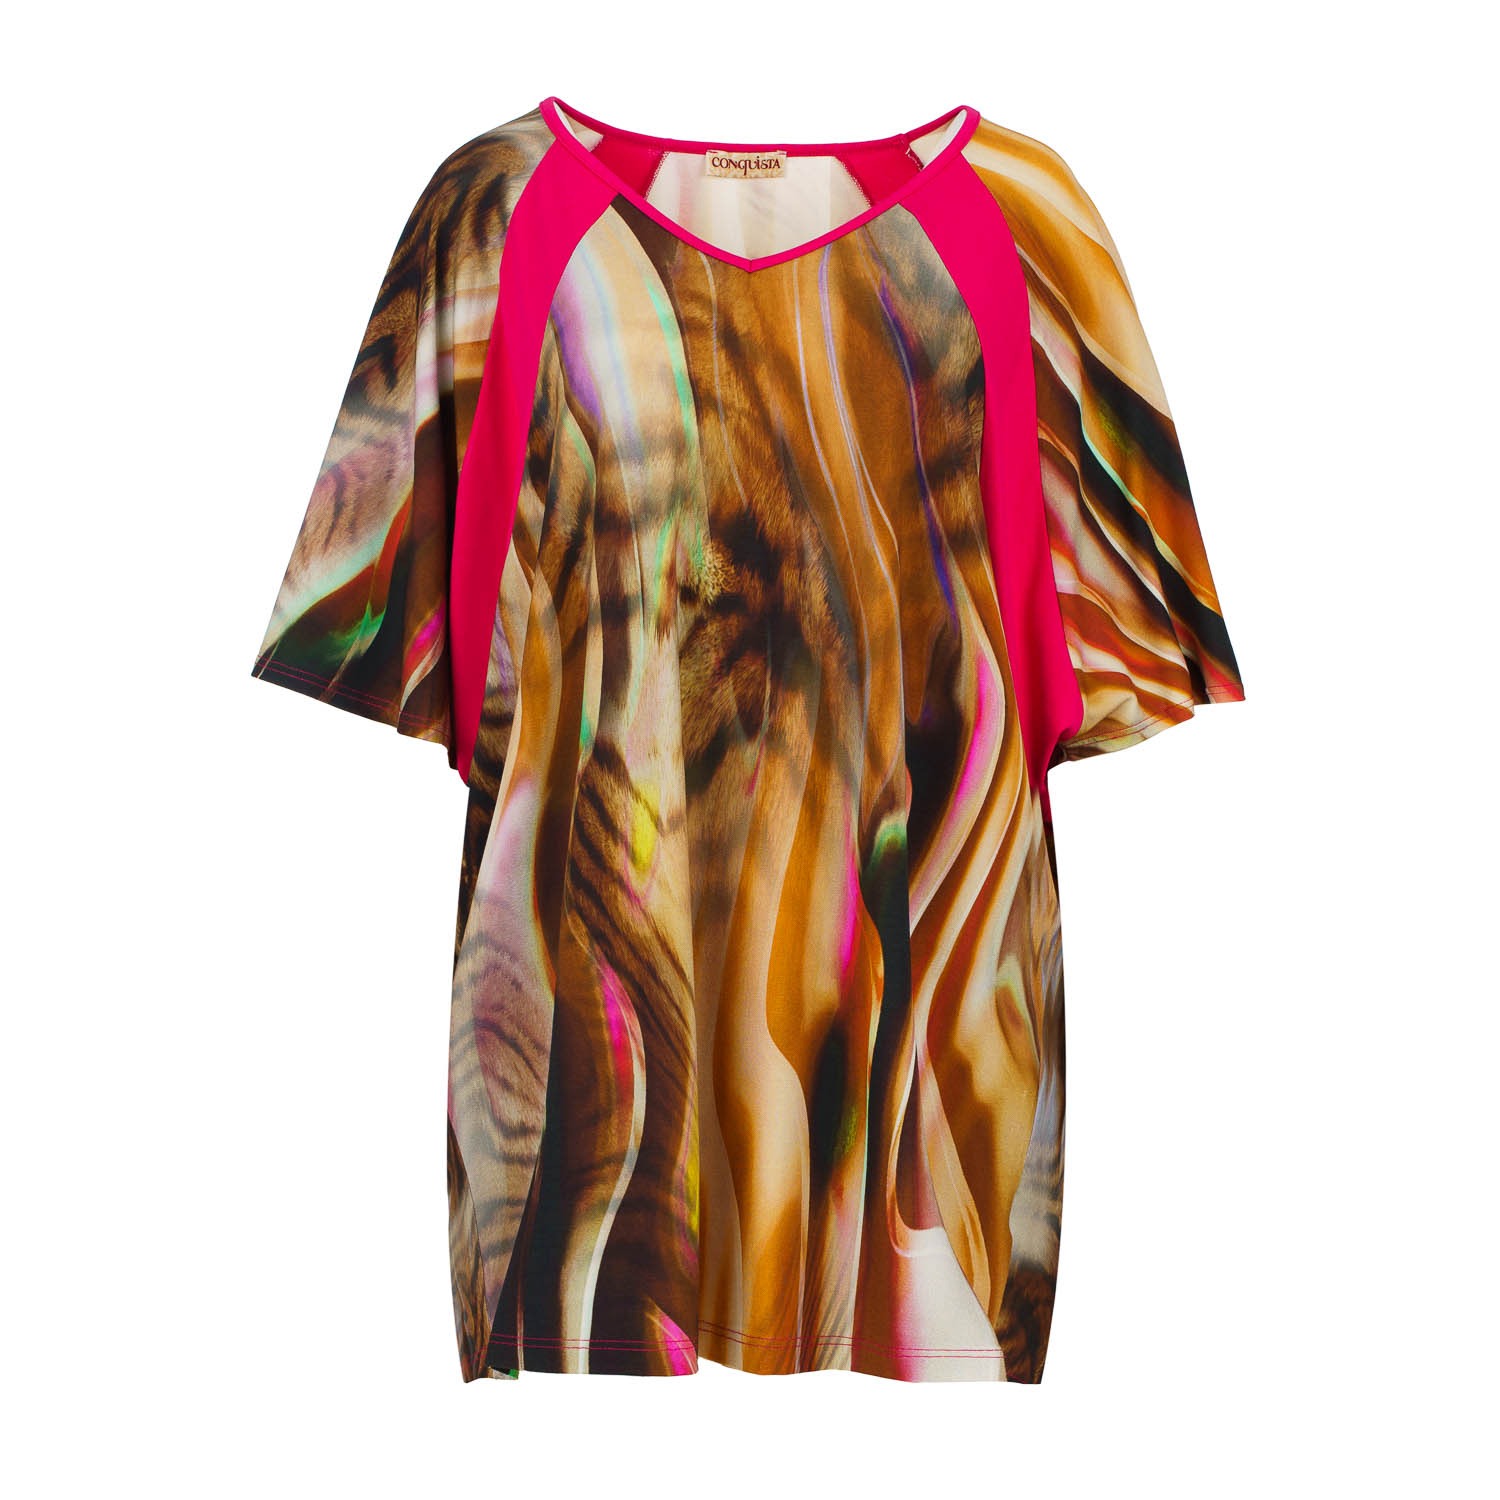 Women’s Print Stretch Jersey Top With Batwing Sleeves Plus Size Medium Conquista